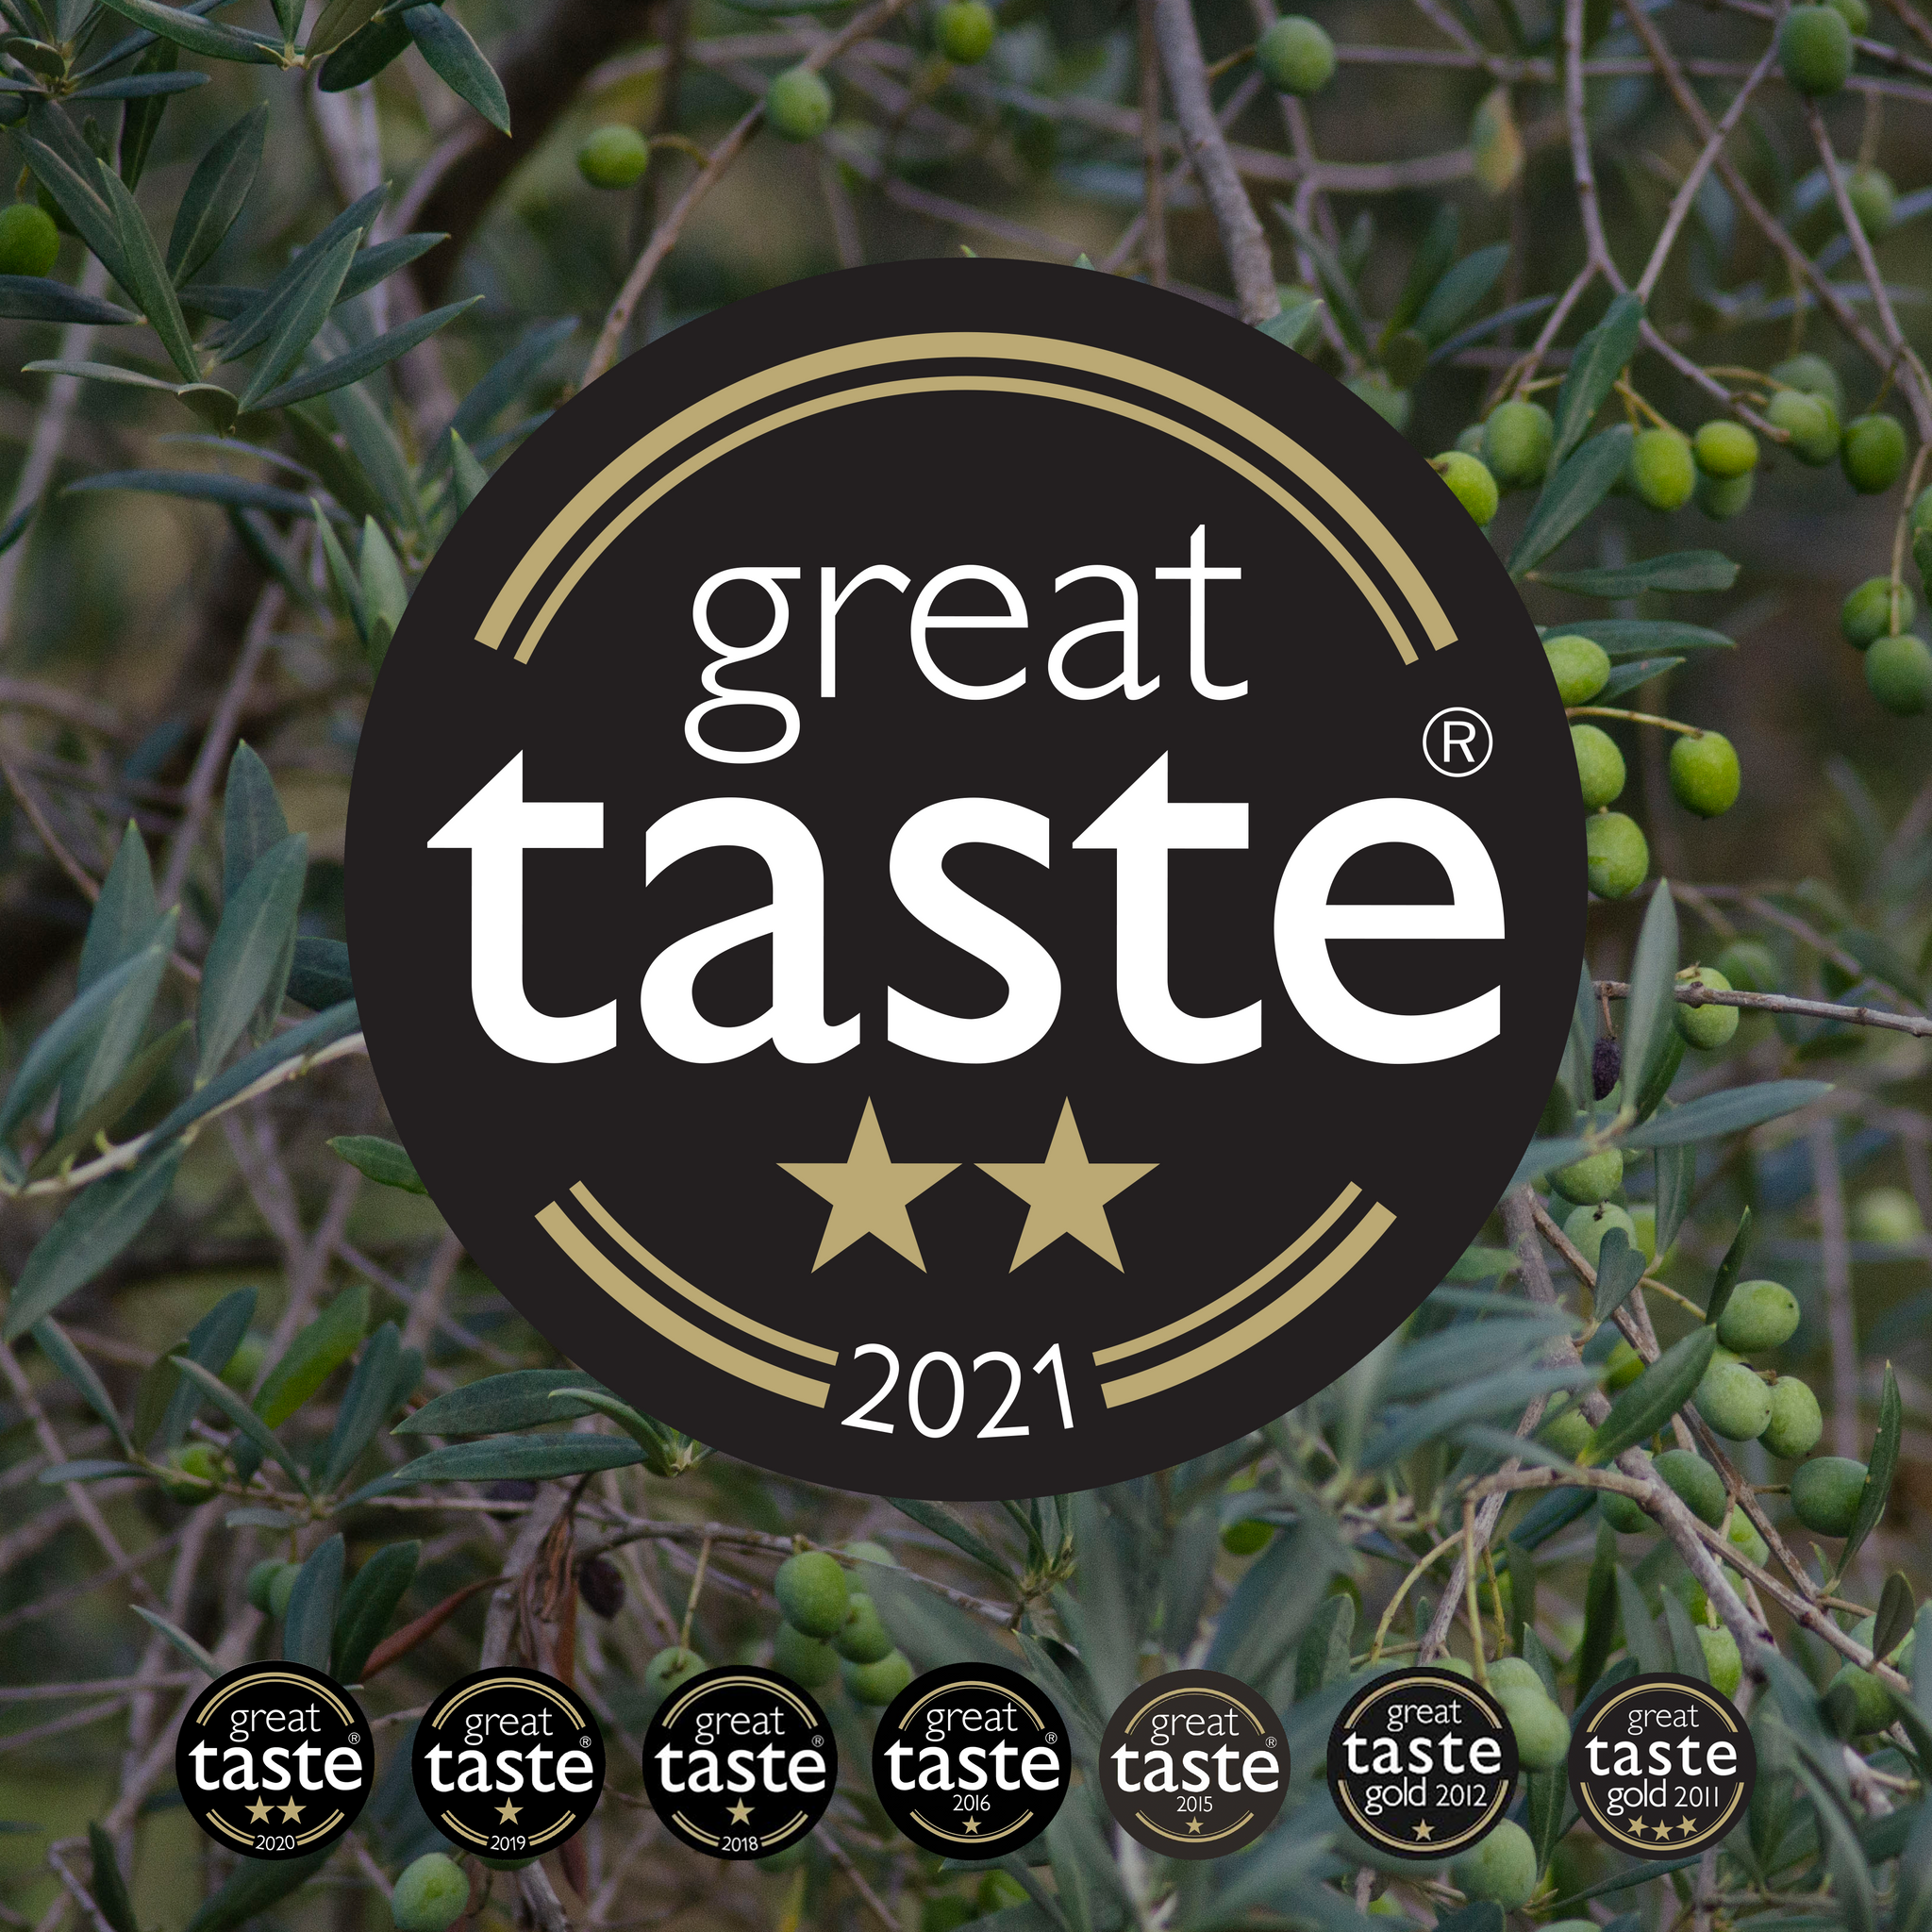 Gold Stars Again - Mother’s Garden Olive Oil is among the Great Taste winners of 2021.